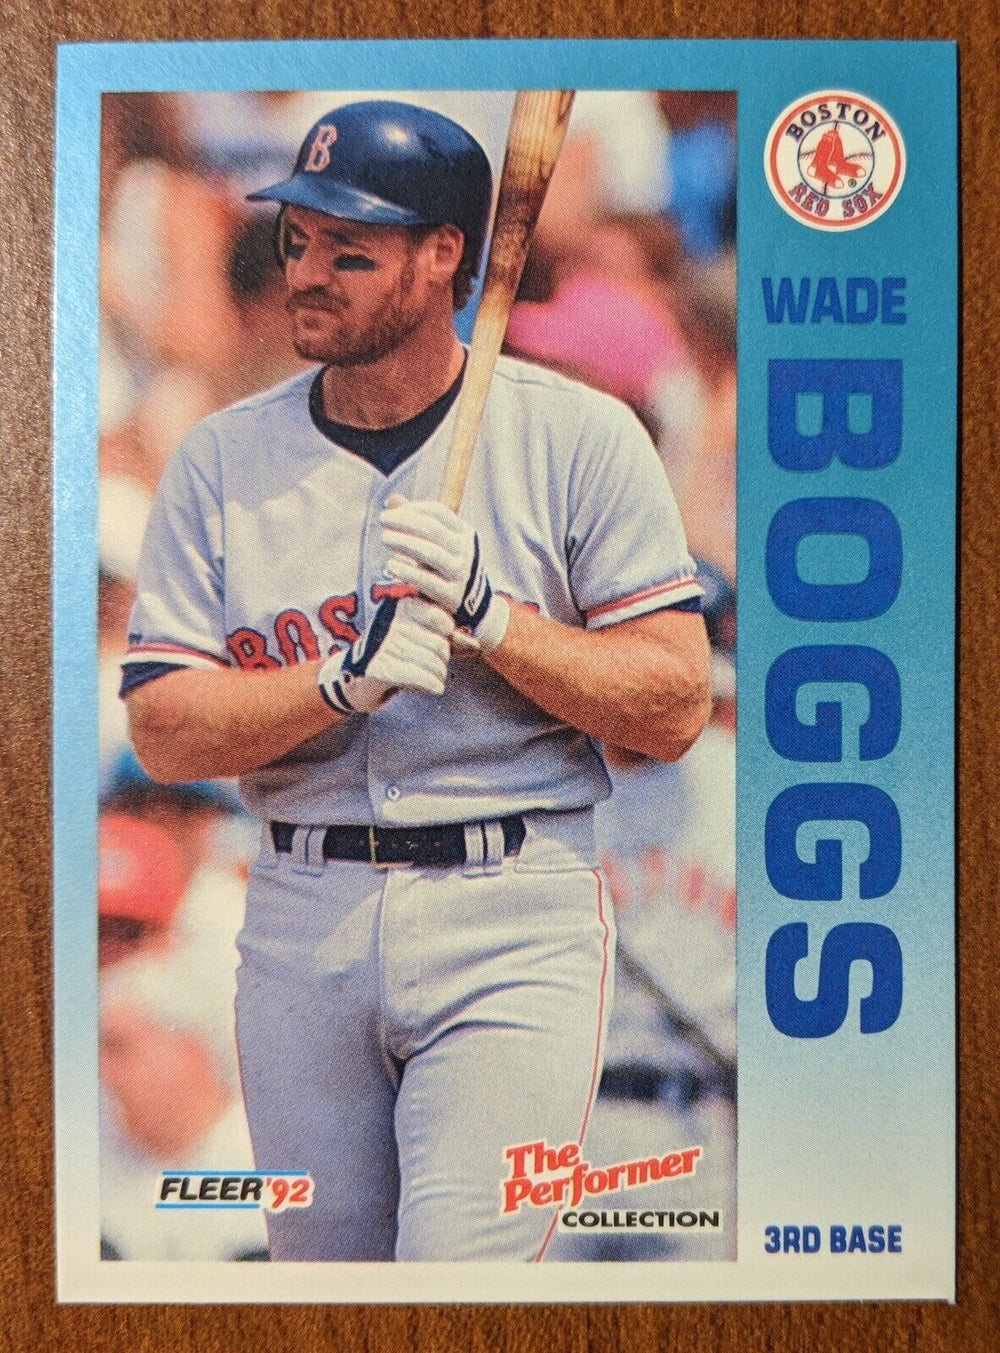 Wade Boggs 1992 Fleer 7-11 / Citgo The Performer Collection Series Mint Card #9